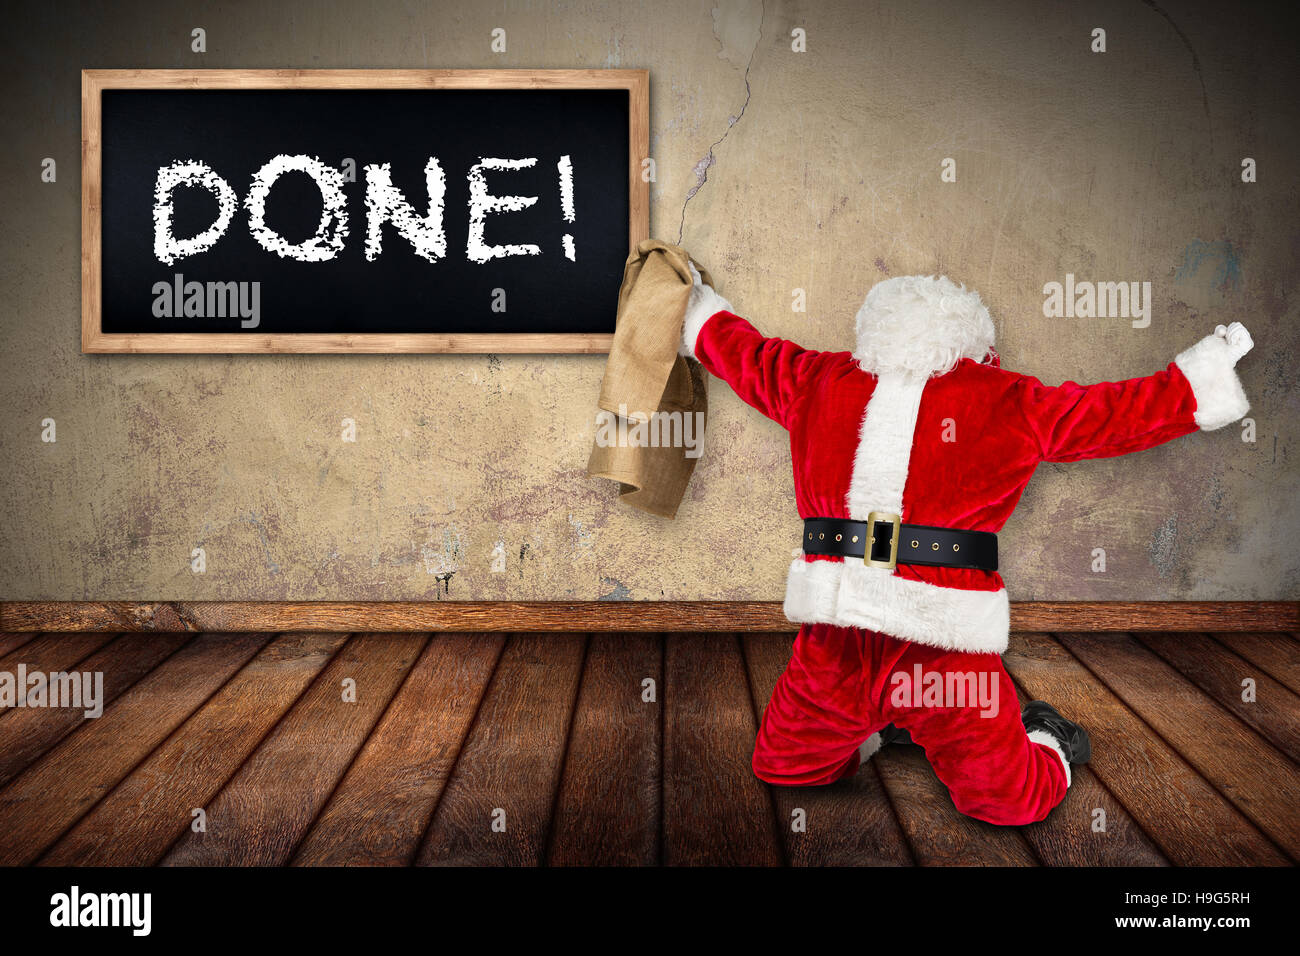 funny crazy hilarious red white santa claus celebration clench fist holding bag in the air job done blackboard on wooden floor interior room Stock Photo